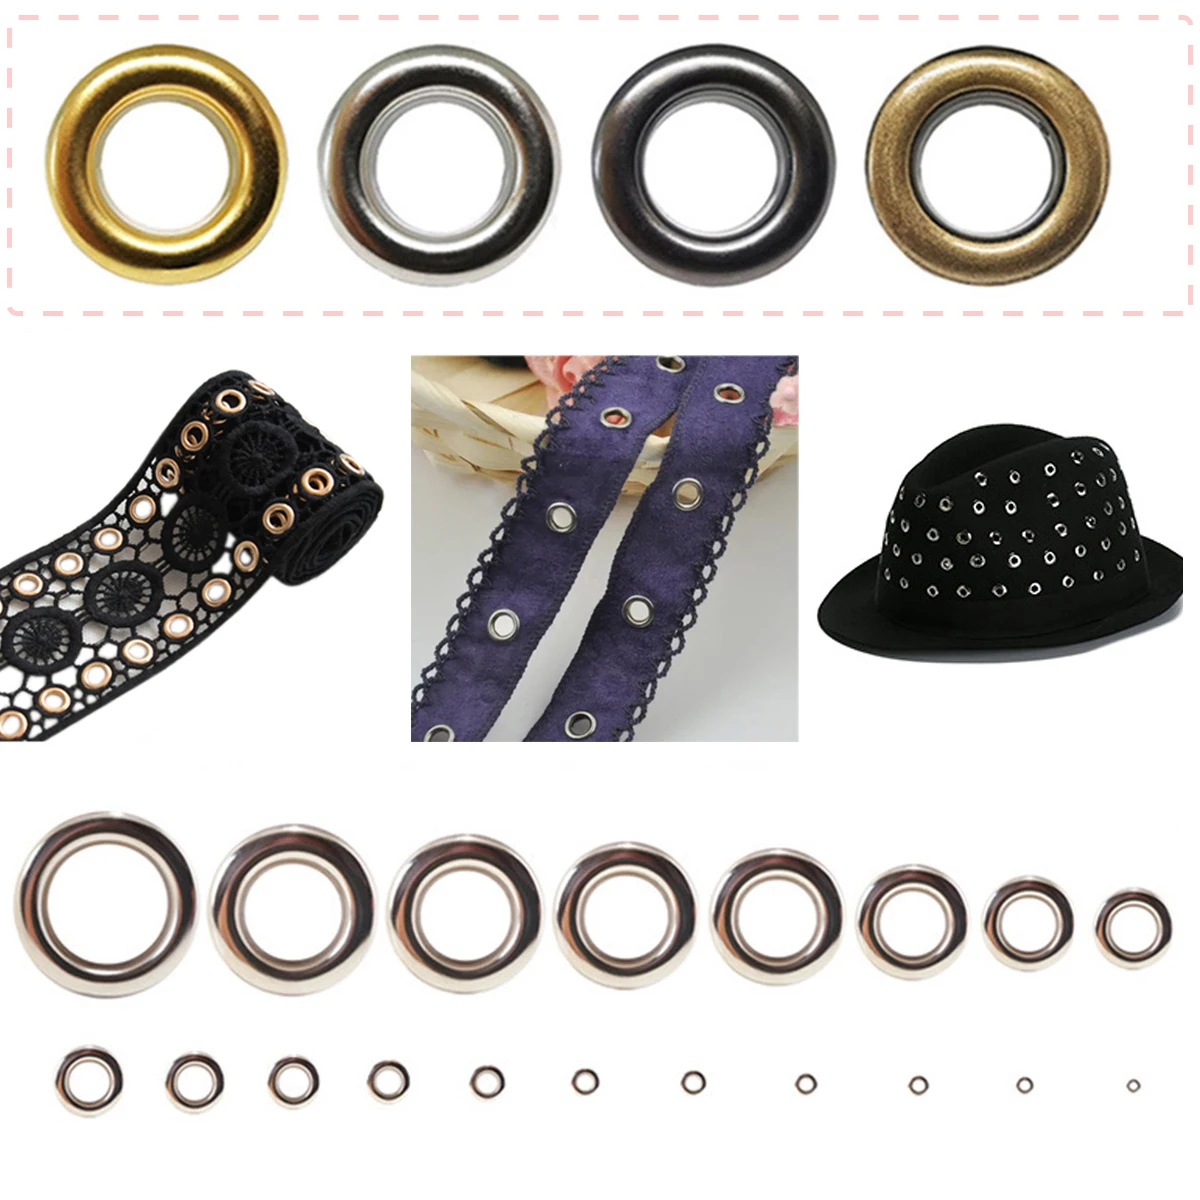 

100pcs Eyelets 1.5/2/2.5mm without Washer Grommets Metal Leather Craft Repair Round Eye Ring Shoes Bag Garment Leather Belt Hat